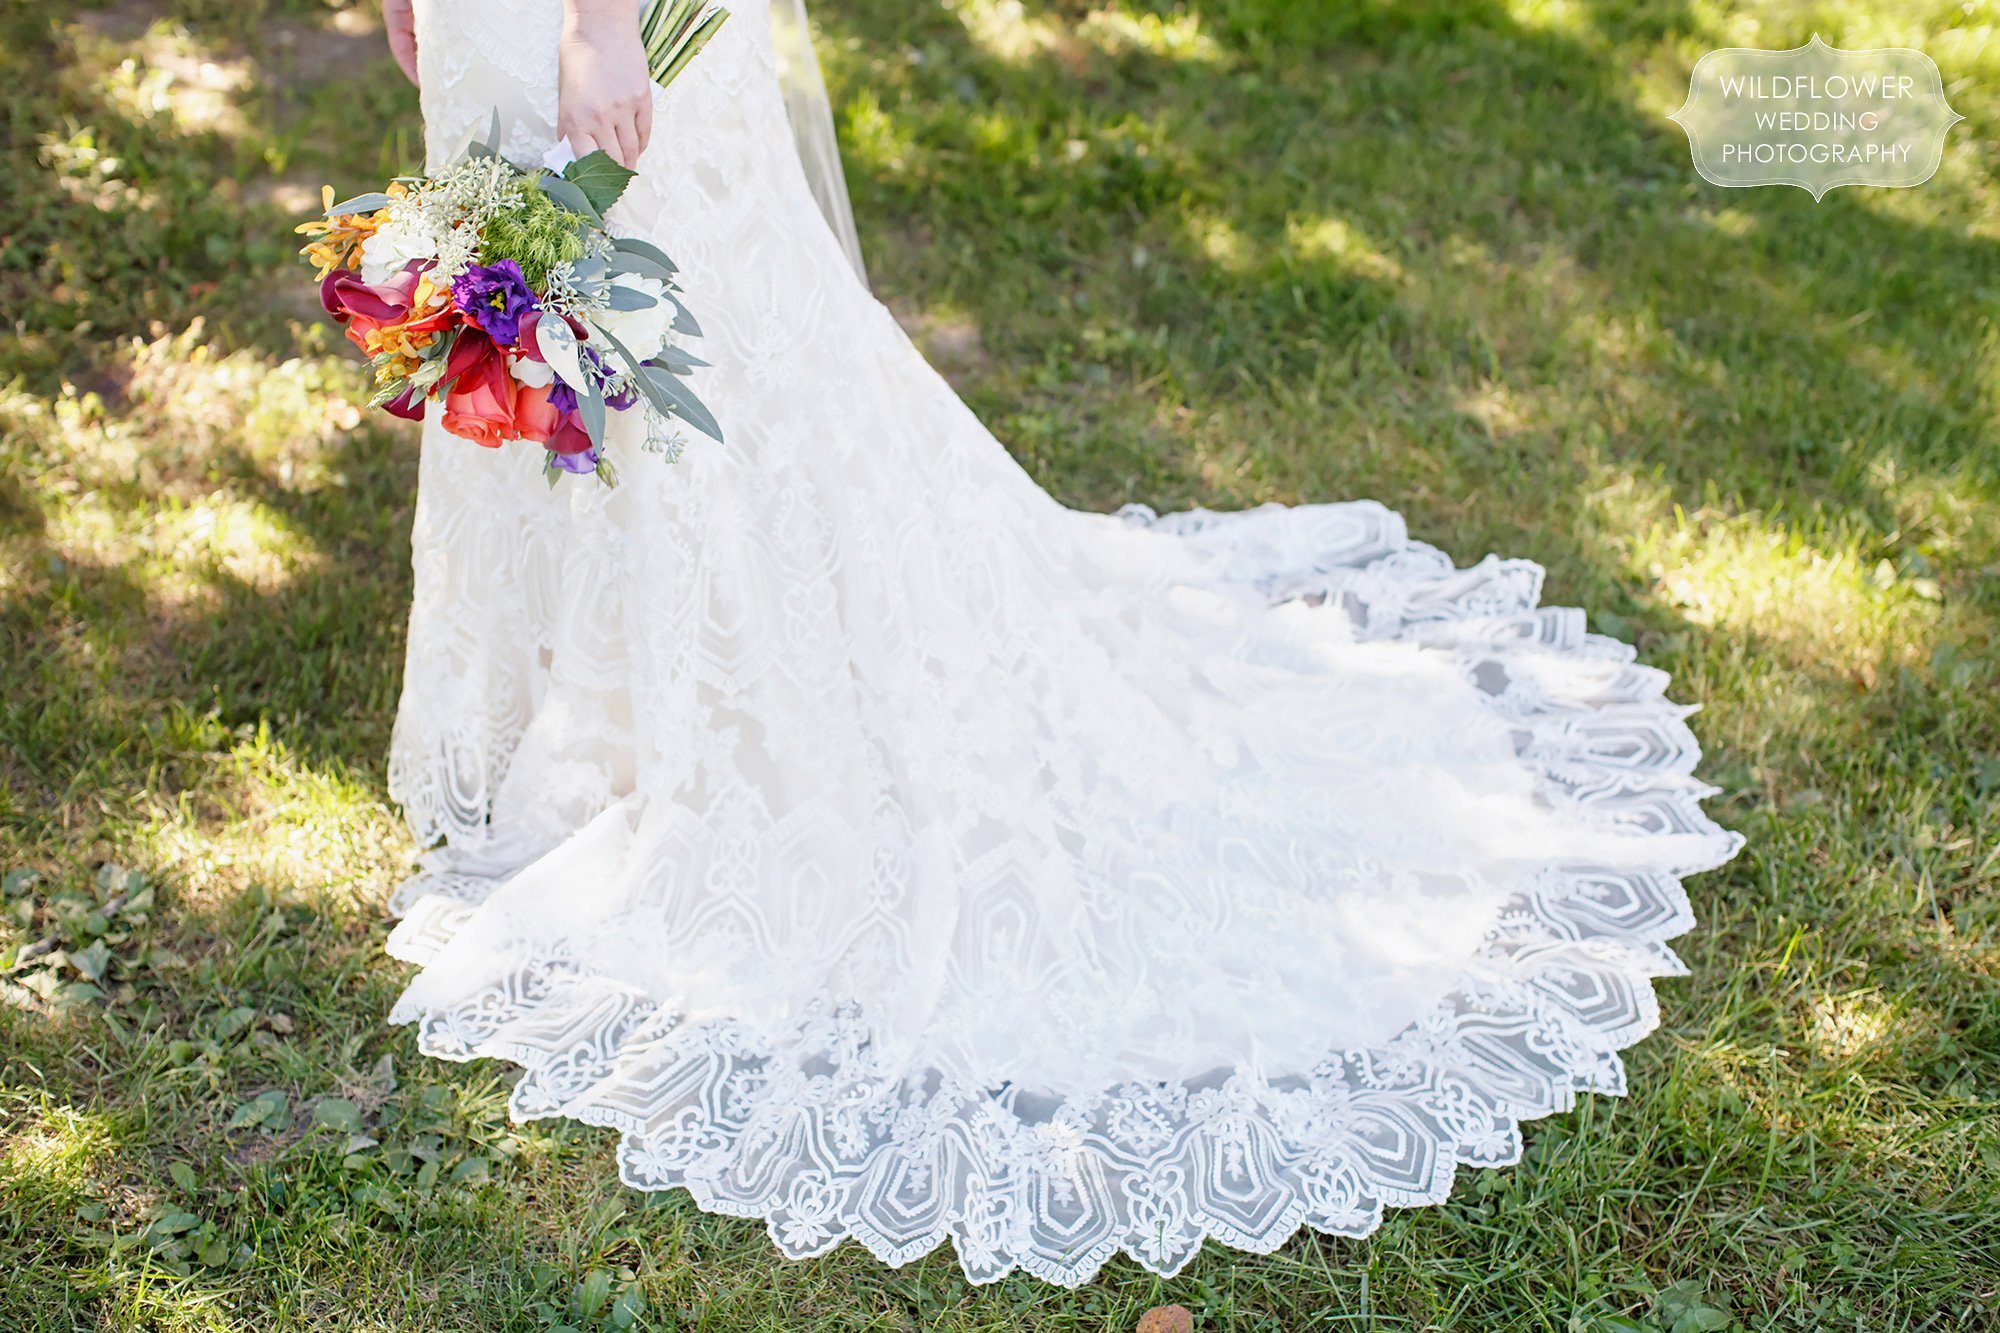 Stunning lace wedding dress with train by Maggie Sottero.